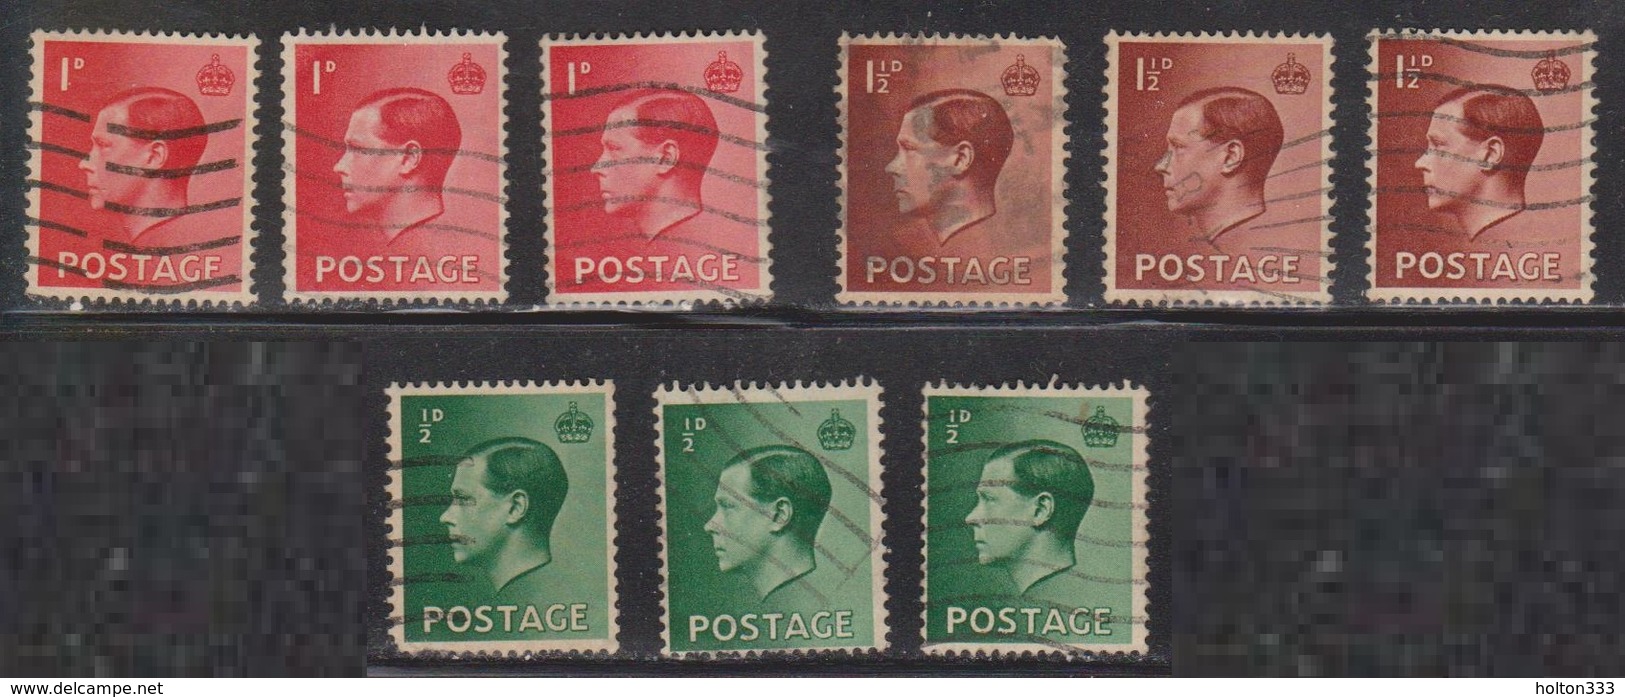 GREAT BRITAIN Scott # 230-2 X 3 Used - KEVII Definitives - Used Stamps